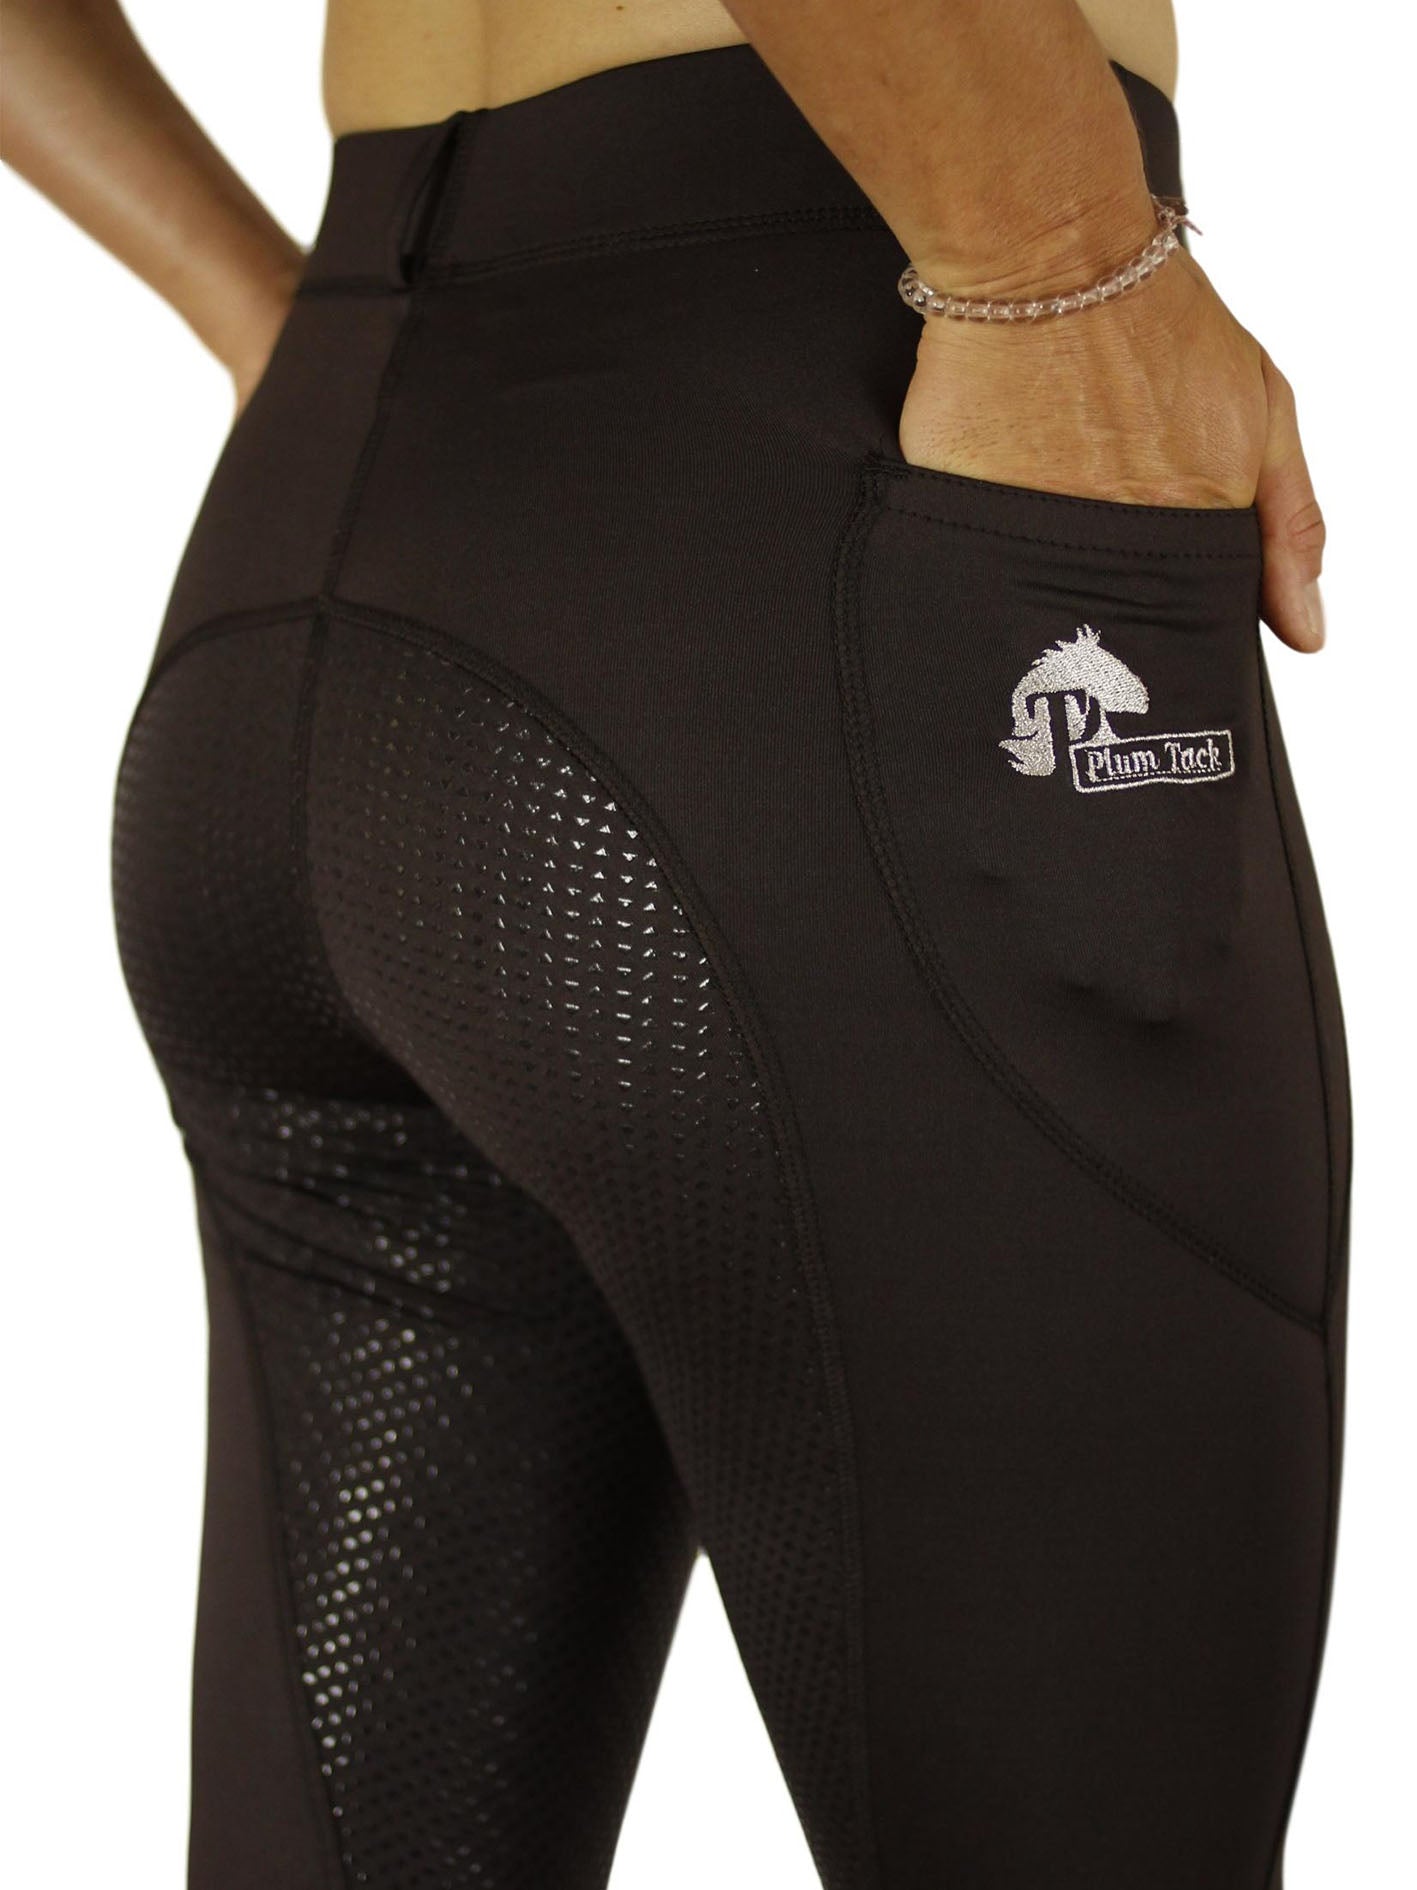 Riding tights in Java Brown. In sizes 6 to 28